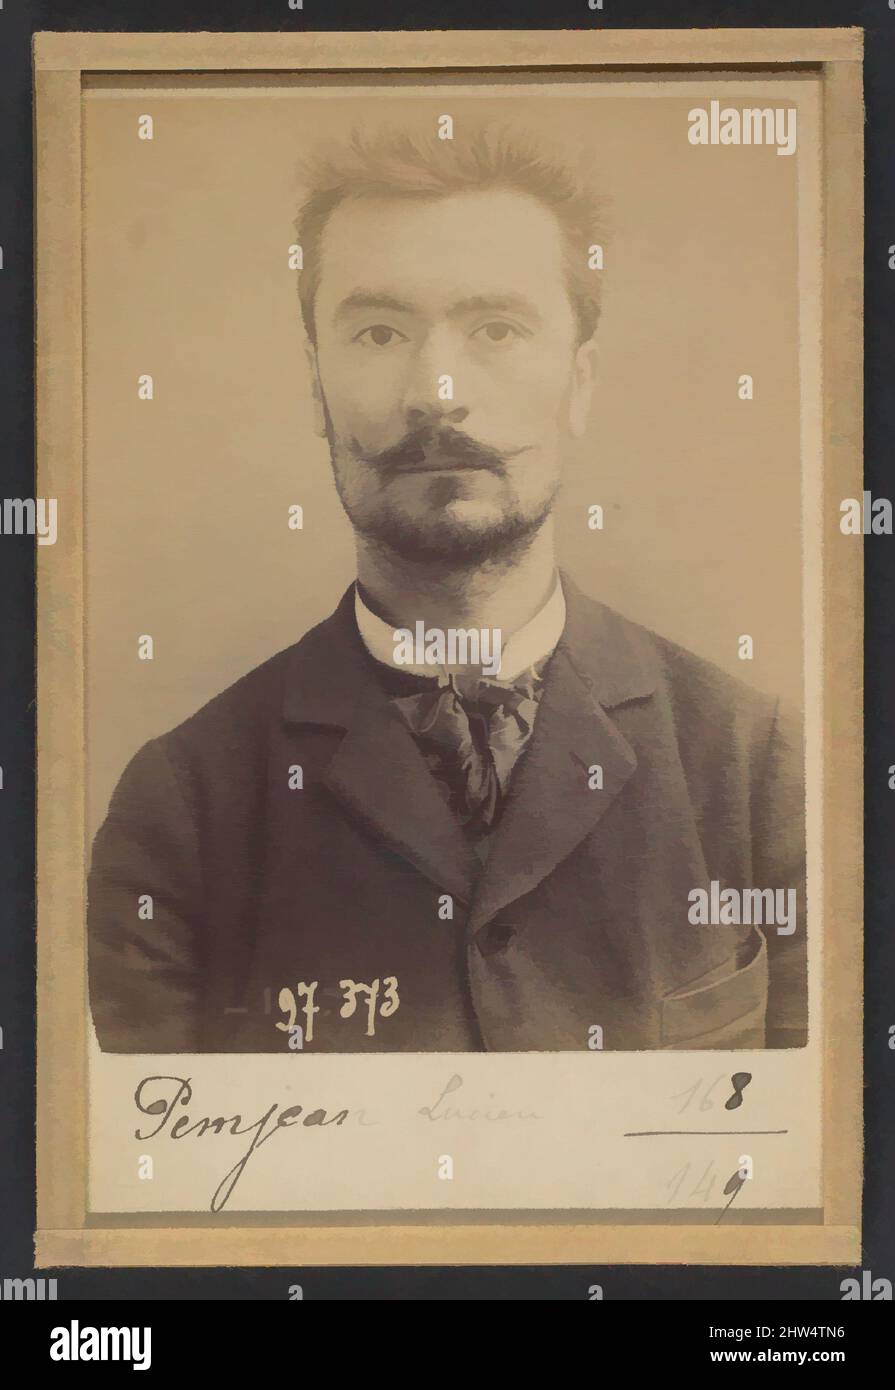 Art inspired by Pemjean. Lucien, Pierre. 32 ans, né à Lyon (Rhône). Publiciste. Anarchiste. 2/1/93., 1893, Albumen silver print from glass negative, 10.5 x 7 x 0.5 cm (4 1/8 x 2 3/4 x 3/16 in.) each, Photographs, Alphonse Bertillon (French, 1853–1914), Born into a distinguished family, Classic works modernized by Artotop with a splash of modernity. Shapes, color and value, eye-catching visual impact on art. Emotions through freedom of artworks in a contemporary way. A timeless message pursuing a wildly creative new direction. Artists turning to the digital medium and creating the Artotop NFT Stock Photo